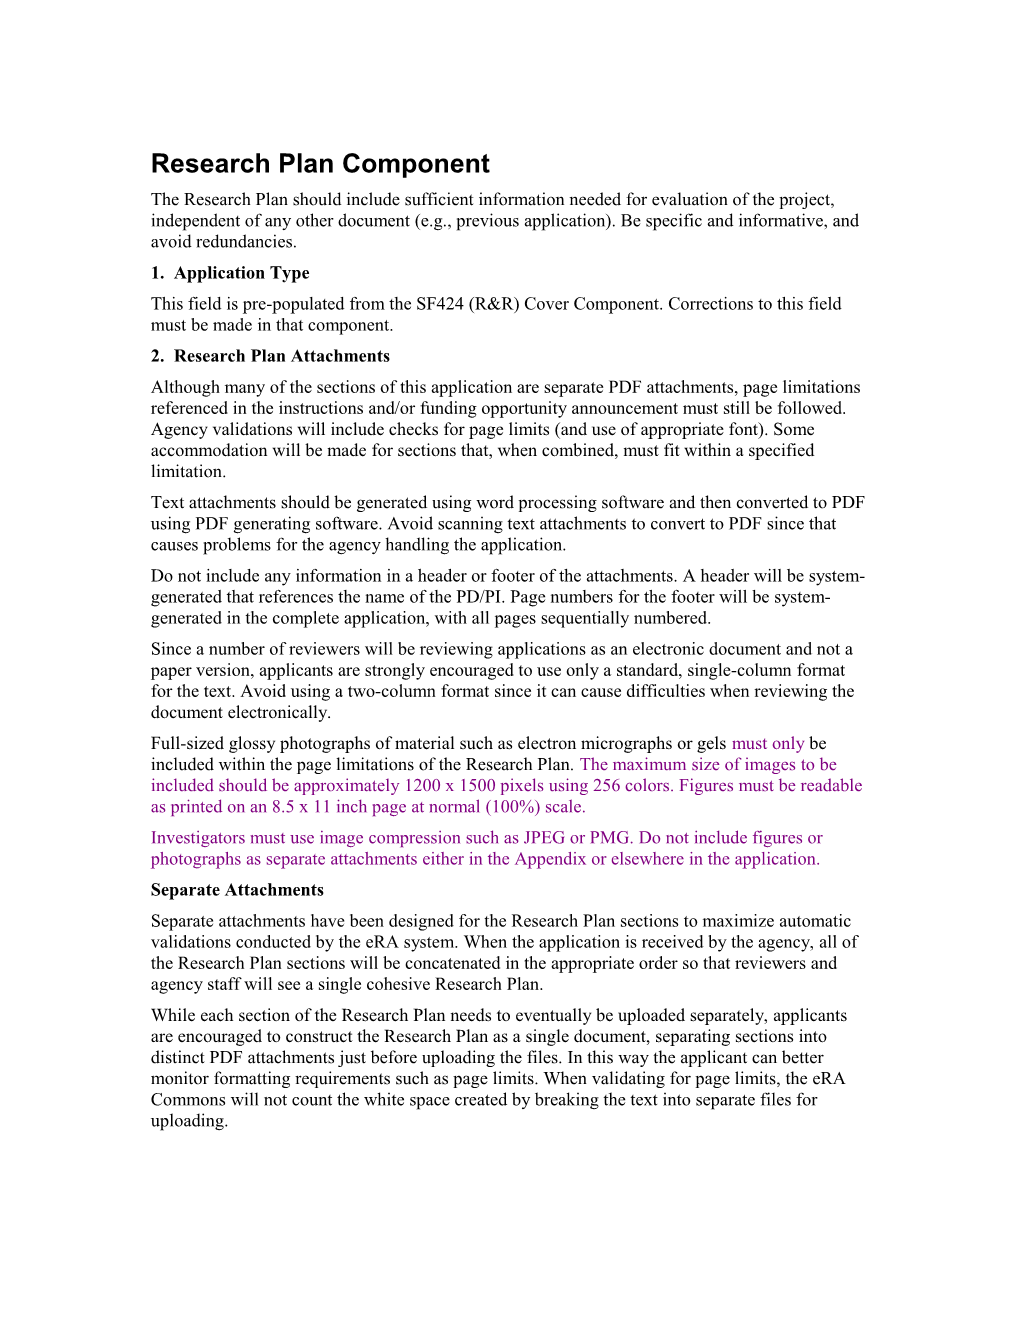 Research Plan Component